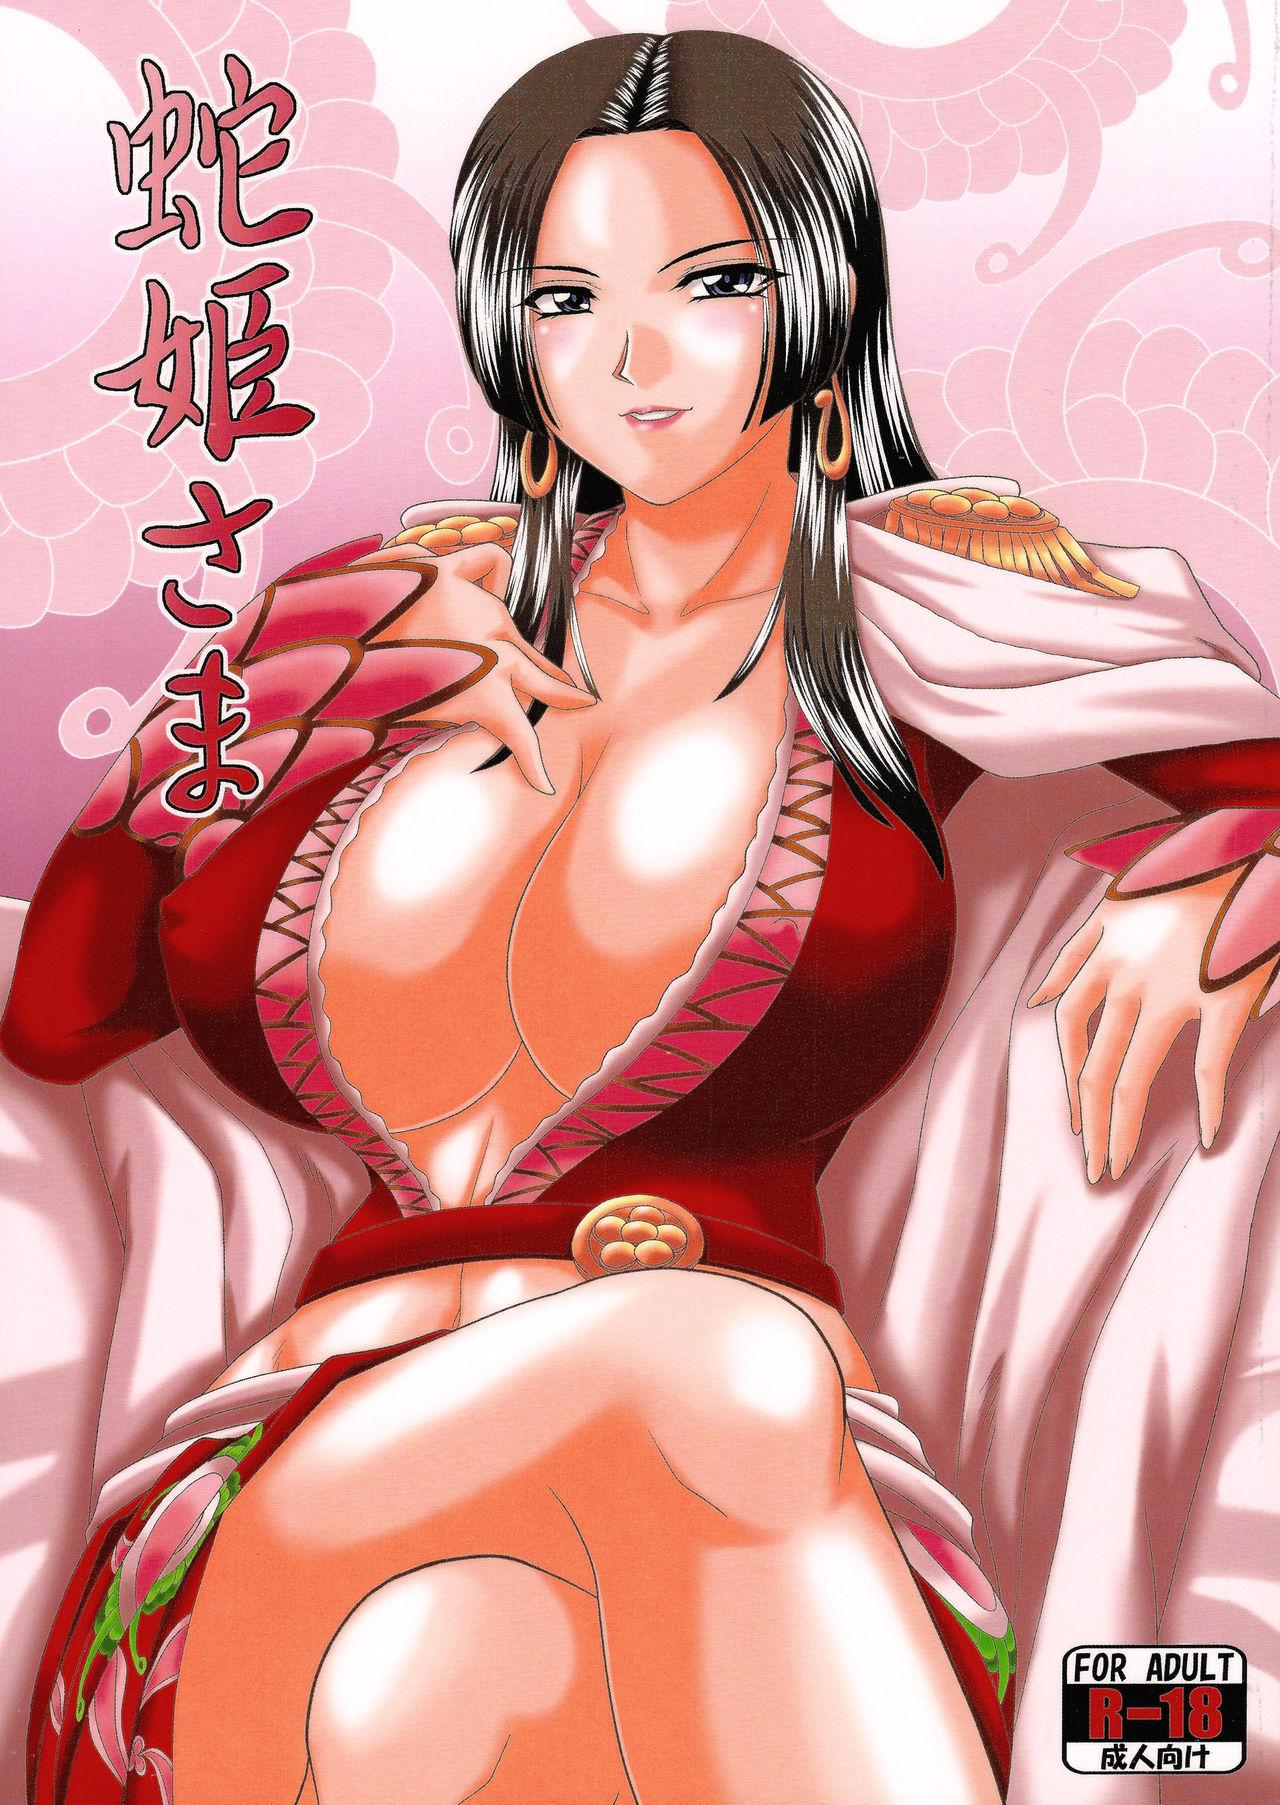 Boy Girl Hebi Hime-sama - One piece Muscle - Picture 1